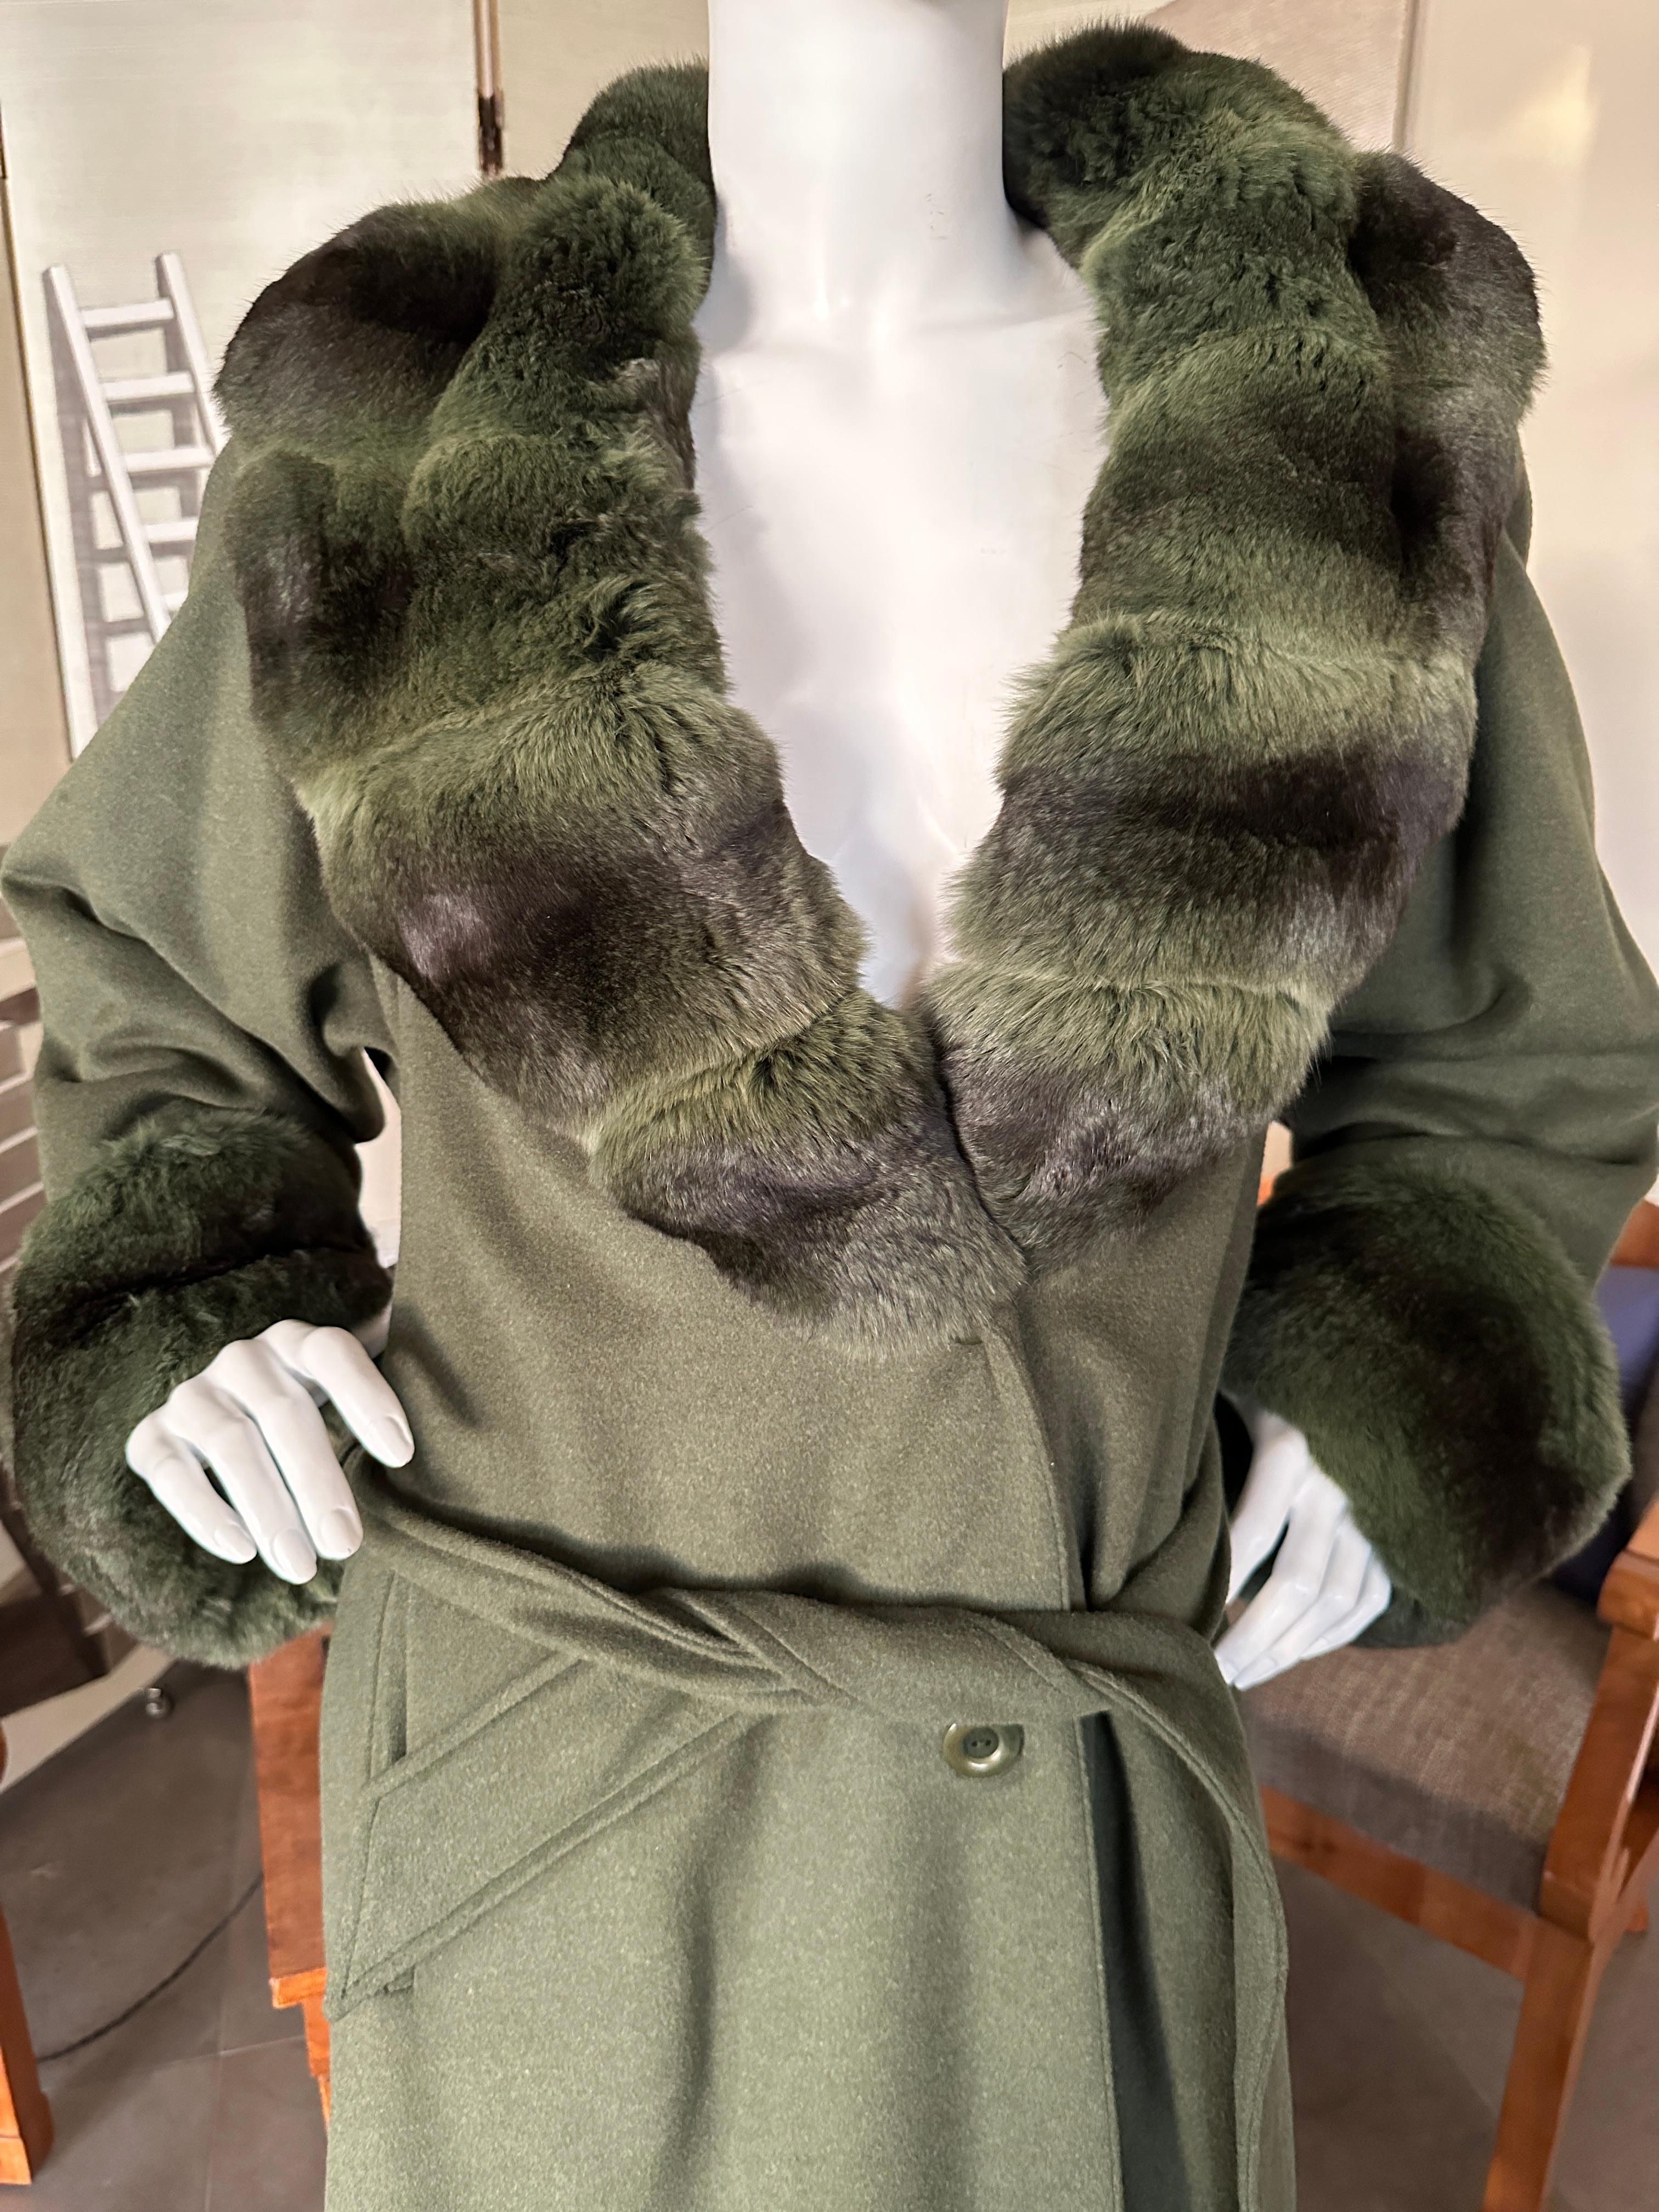 Bergdorf Goodman Luxe Cashmere Coat with Chinchilla Trim and Detachable Fur Lining.
This is so luxurious, a classic to last a lifetime.
The fur lining is detachable, it has buttons to remove it from the coat.
The lining feels like sable, but I'm not